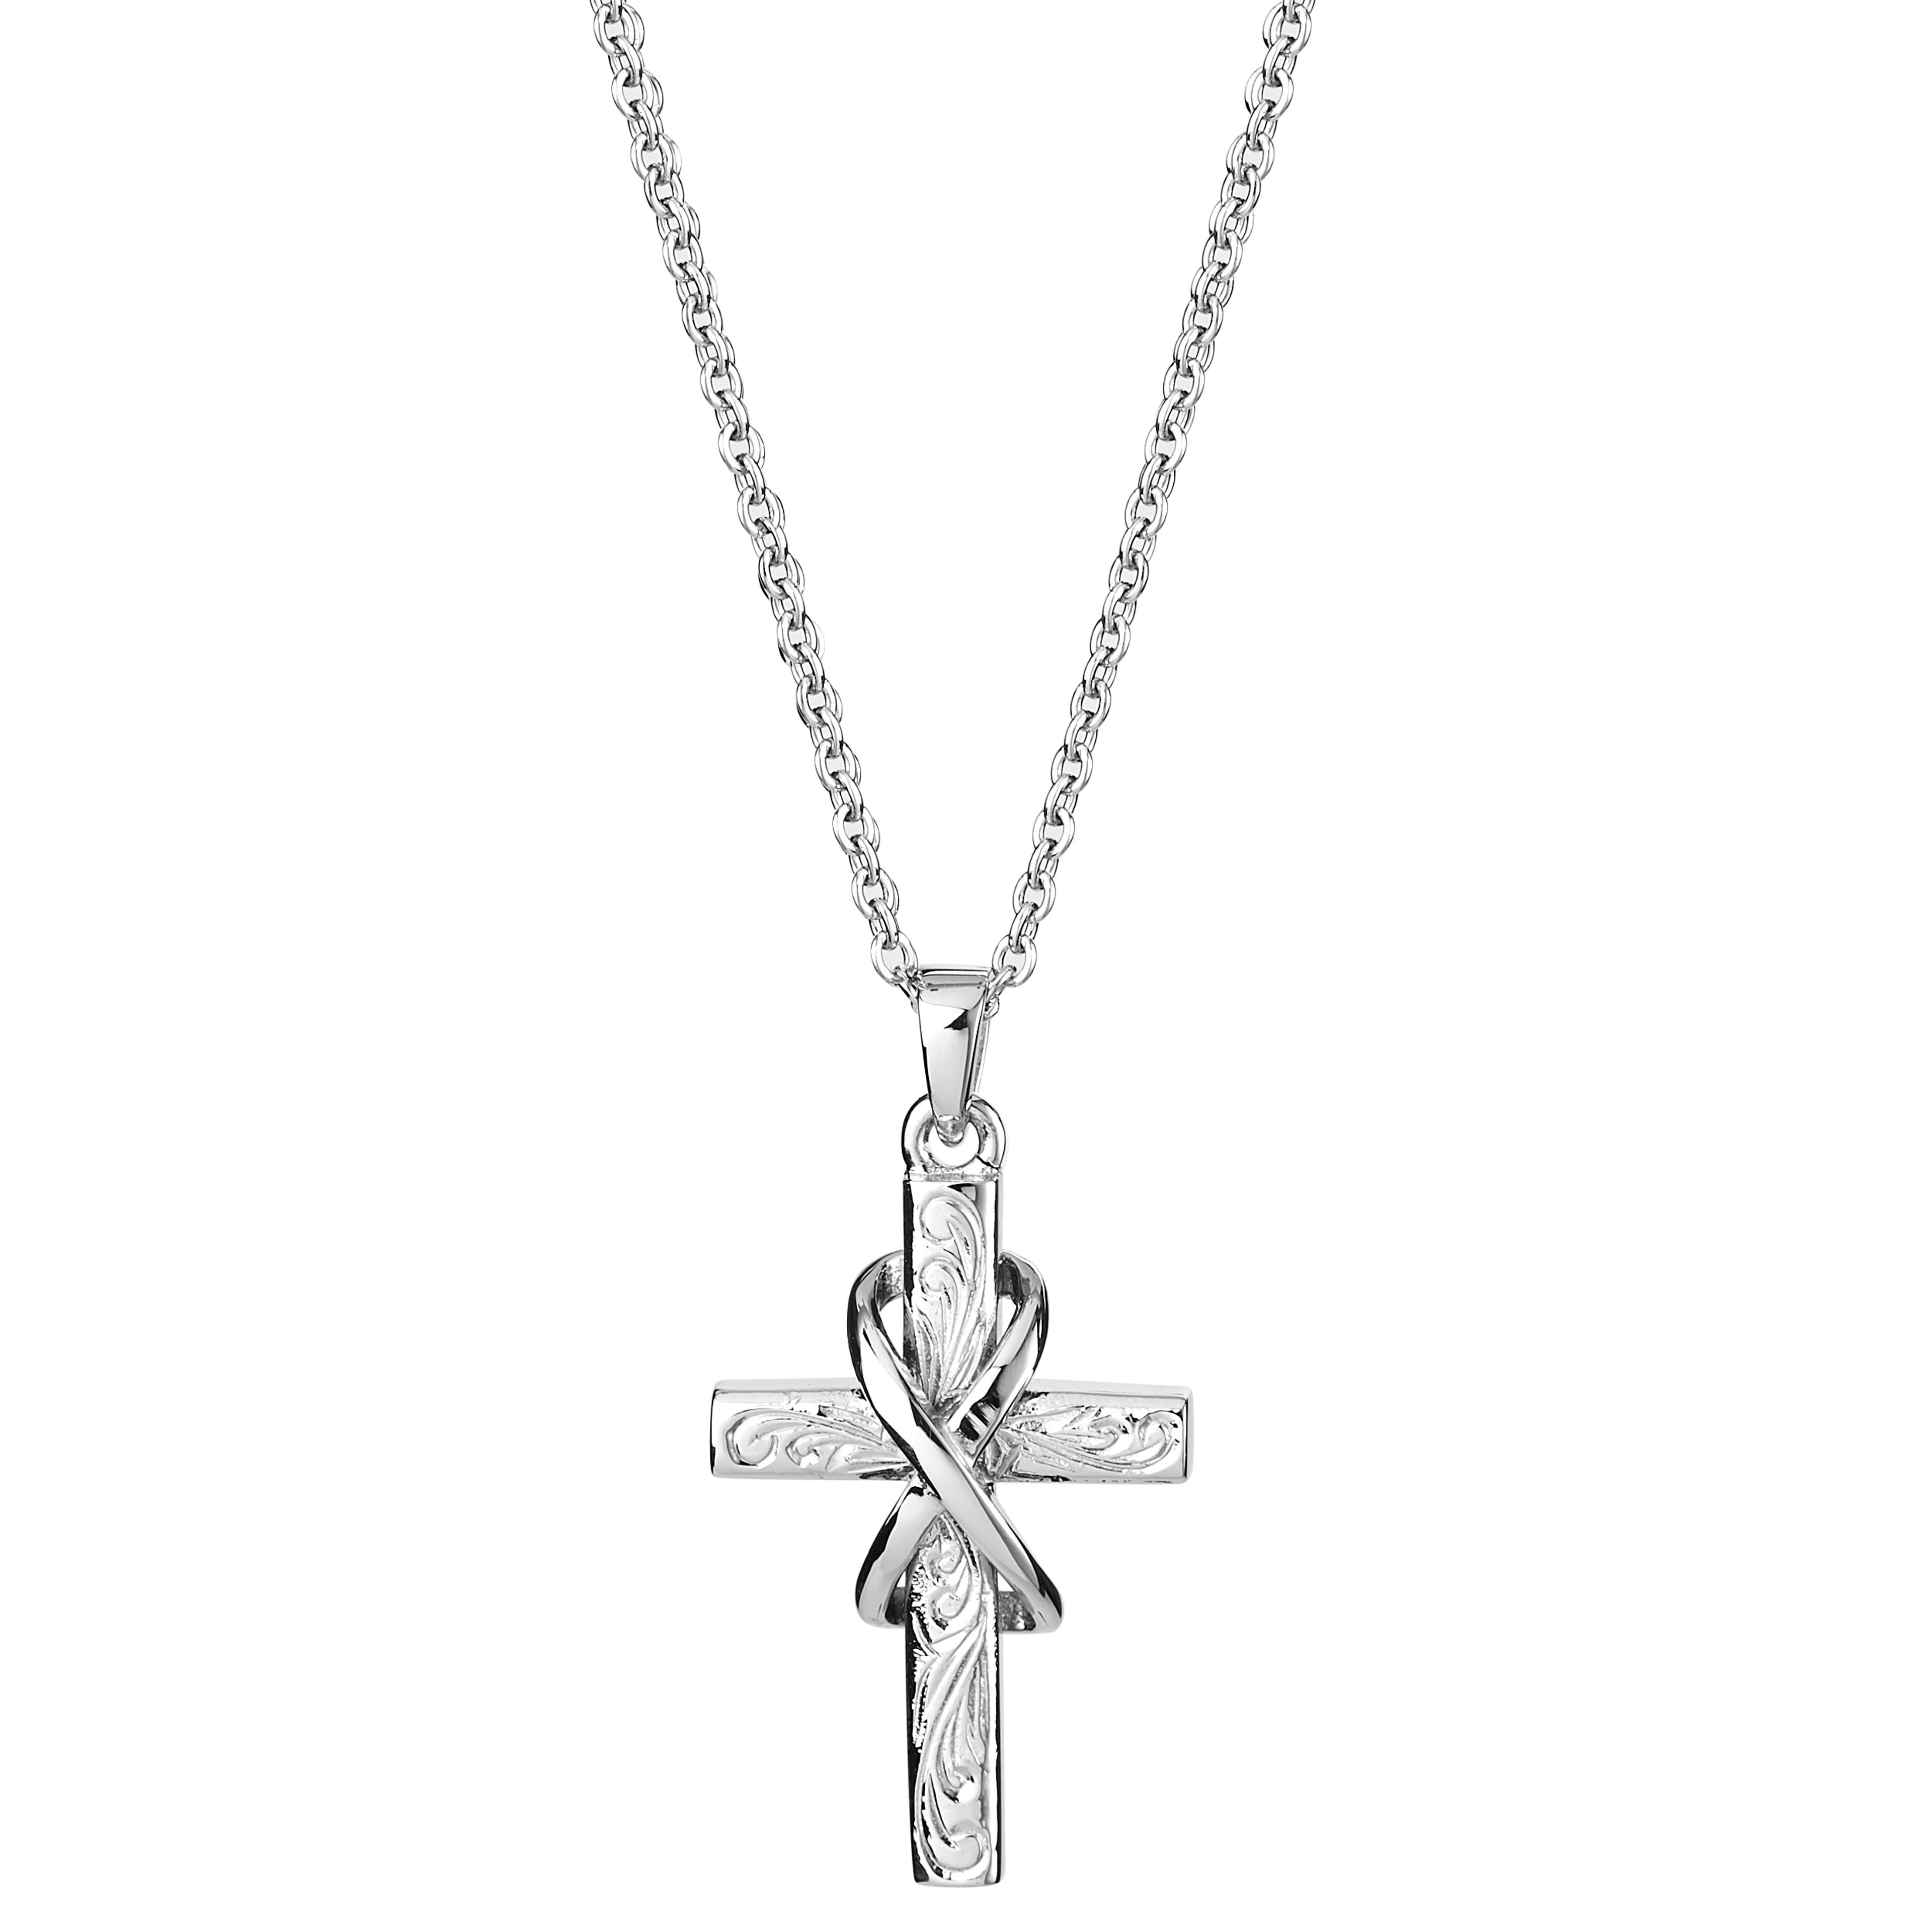 Silver-Tone Stainless Steel With Cross & Infinity Symbol Cable Chain Necklace